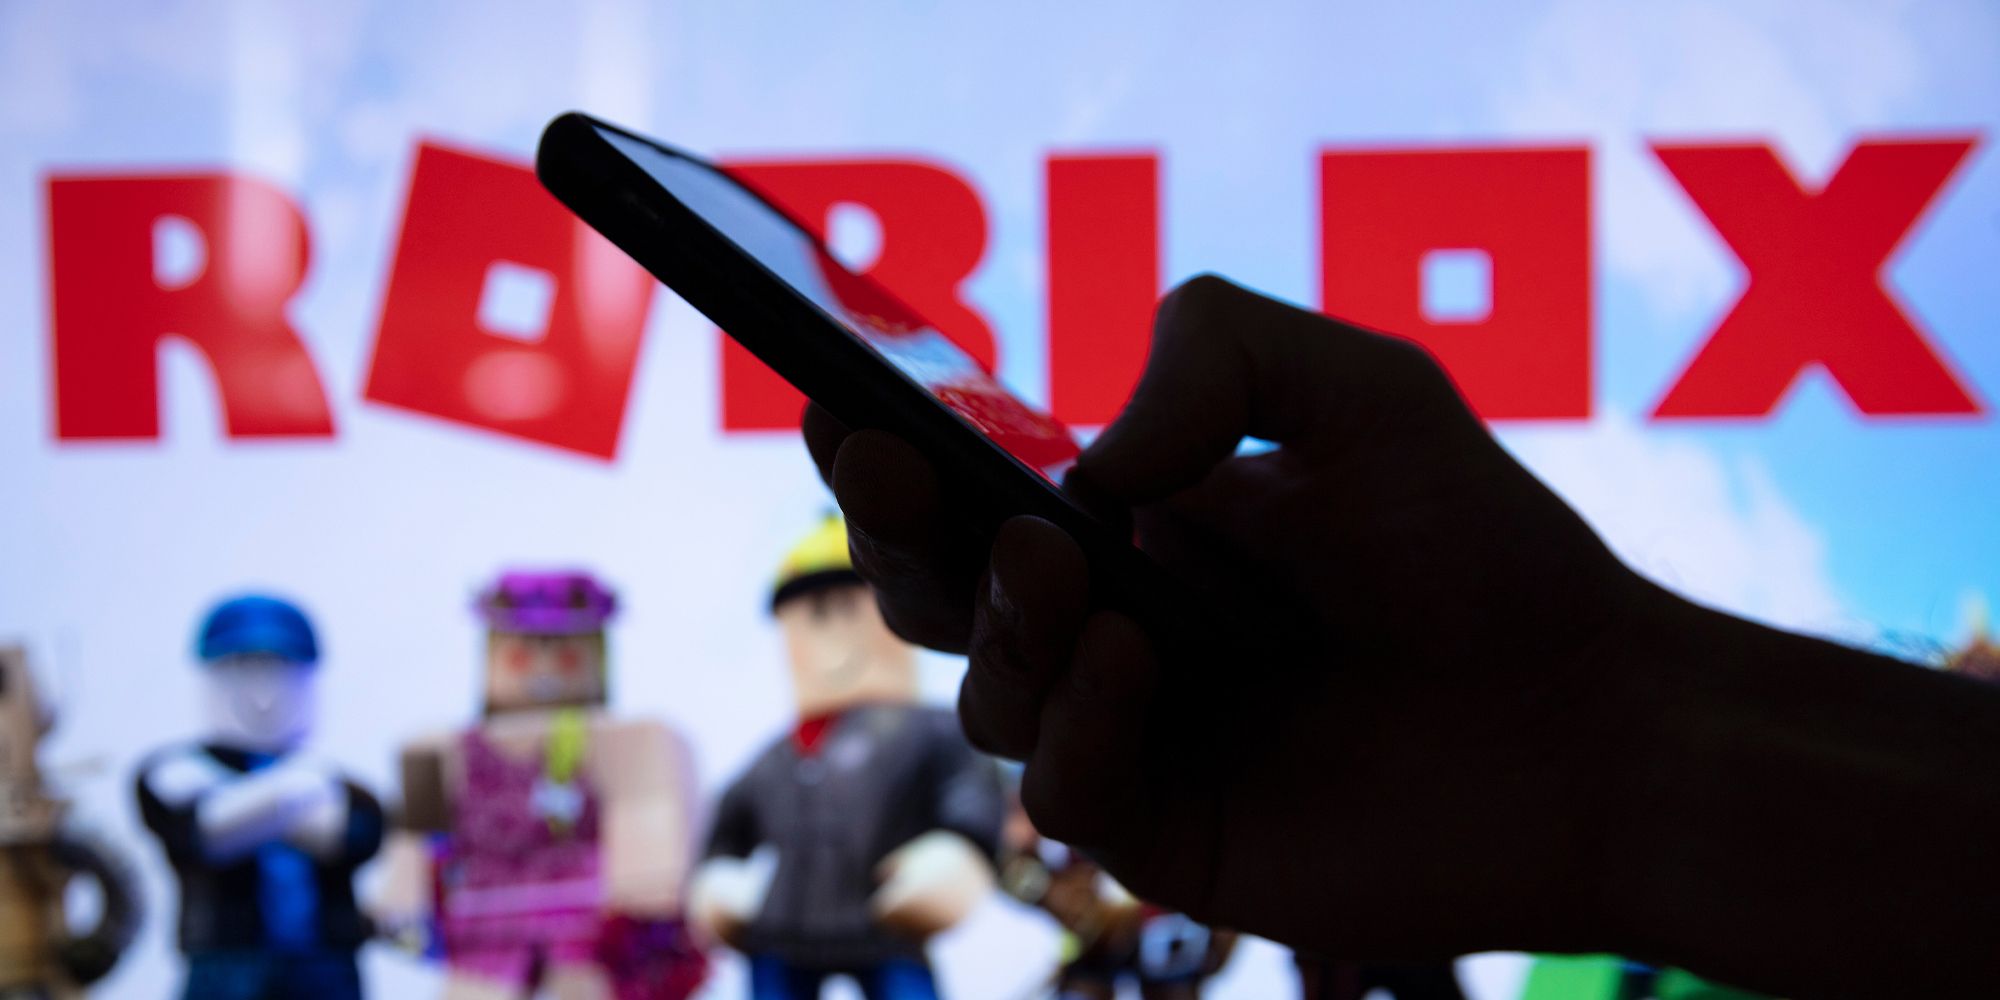 Roblox and Discord Sued Over Girl's Sexual Exploitation